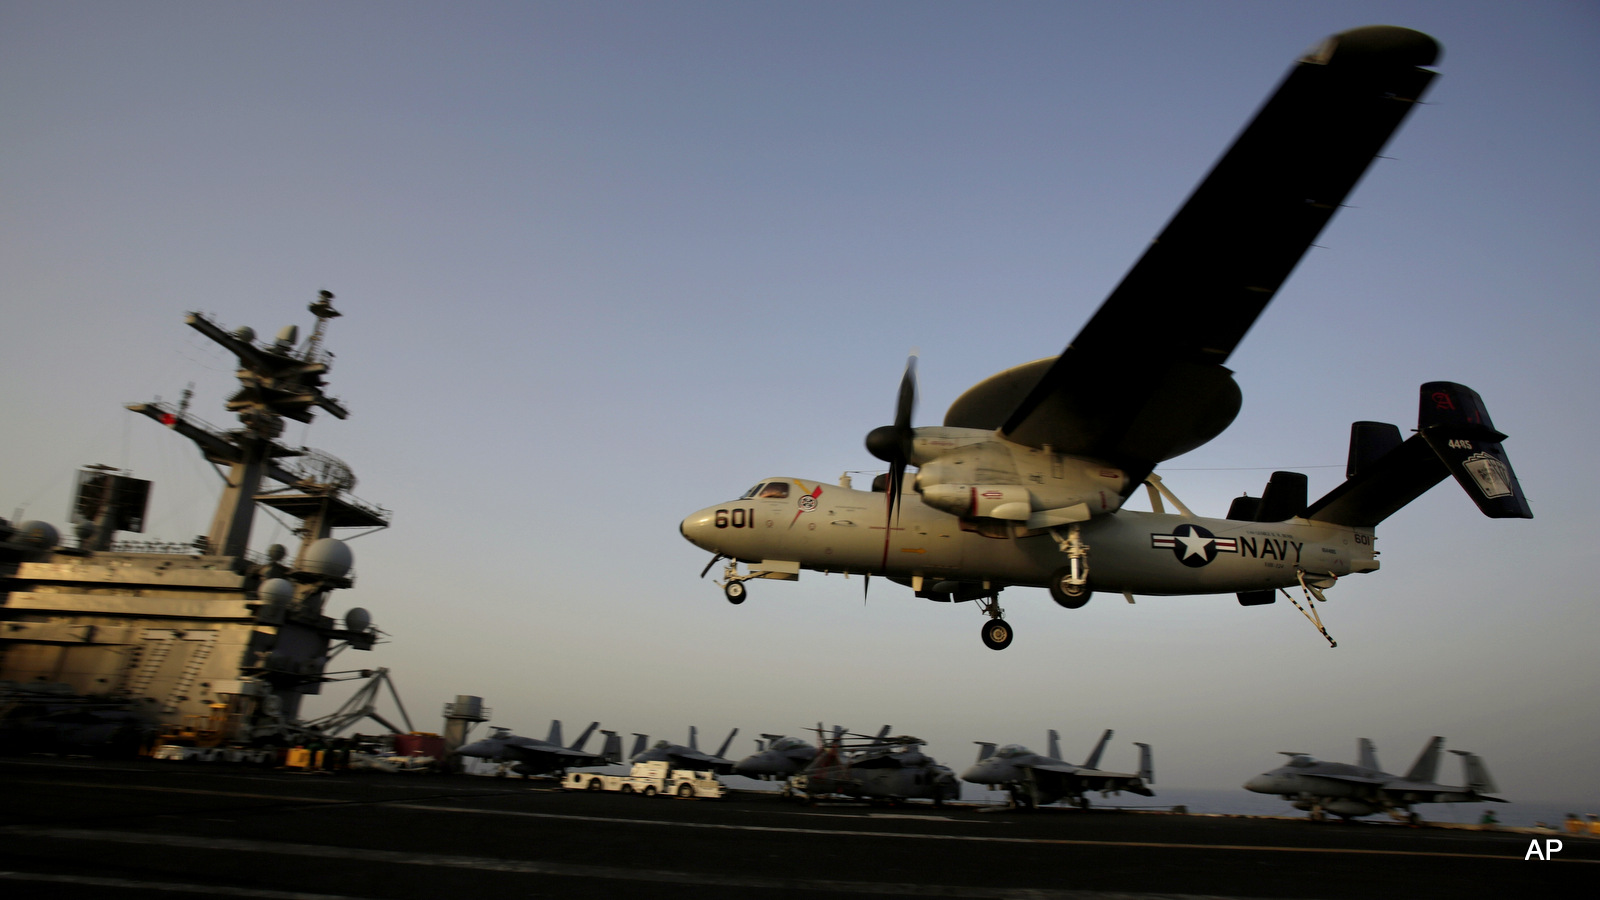 An aircraft lands after missions targeting the ISIS in Iraq from the deck of the U.S. Navy aircraft carrier USS George H.W. Bush in the Persian Gulf. For weapons manufacturers, the nonstop pace of airstrikes targeting ISIS fighters in Iraq and Syria, as well as Saudi-led bombing of Yemen’s Shiite rebels and their allies, means billions of dollars more in sales.